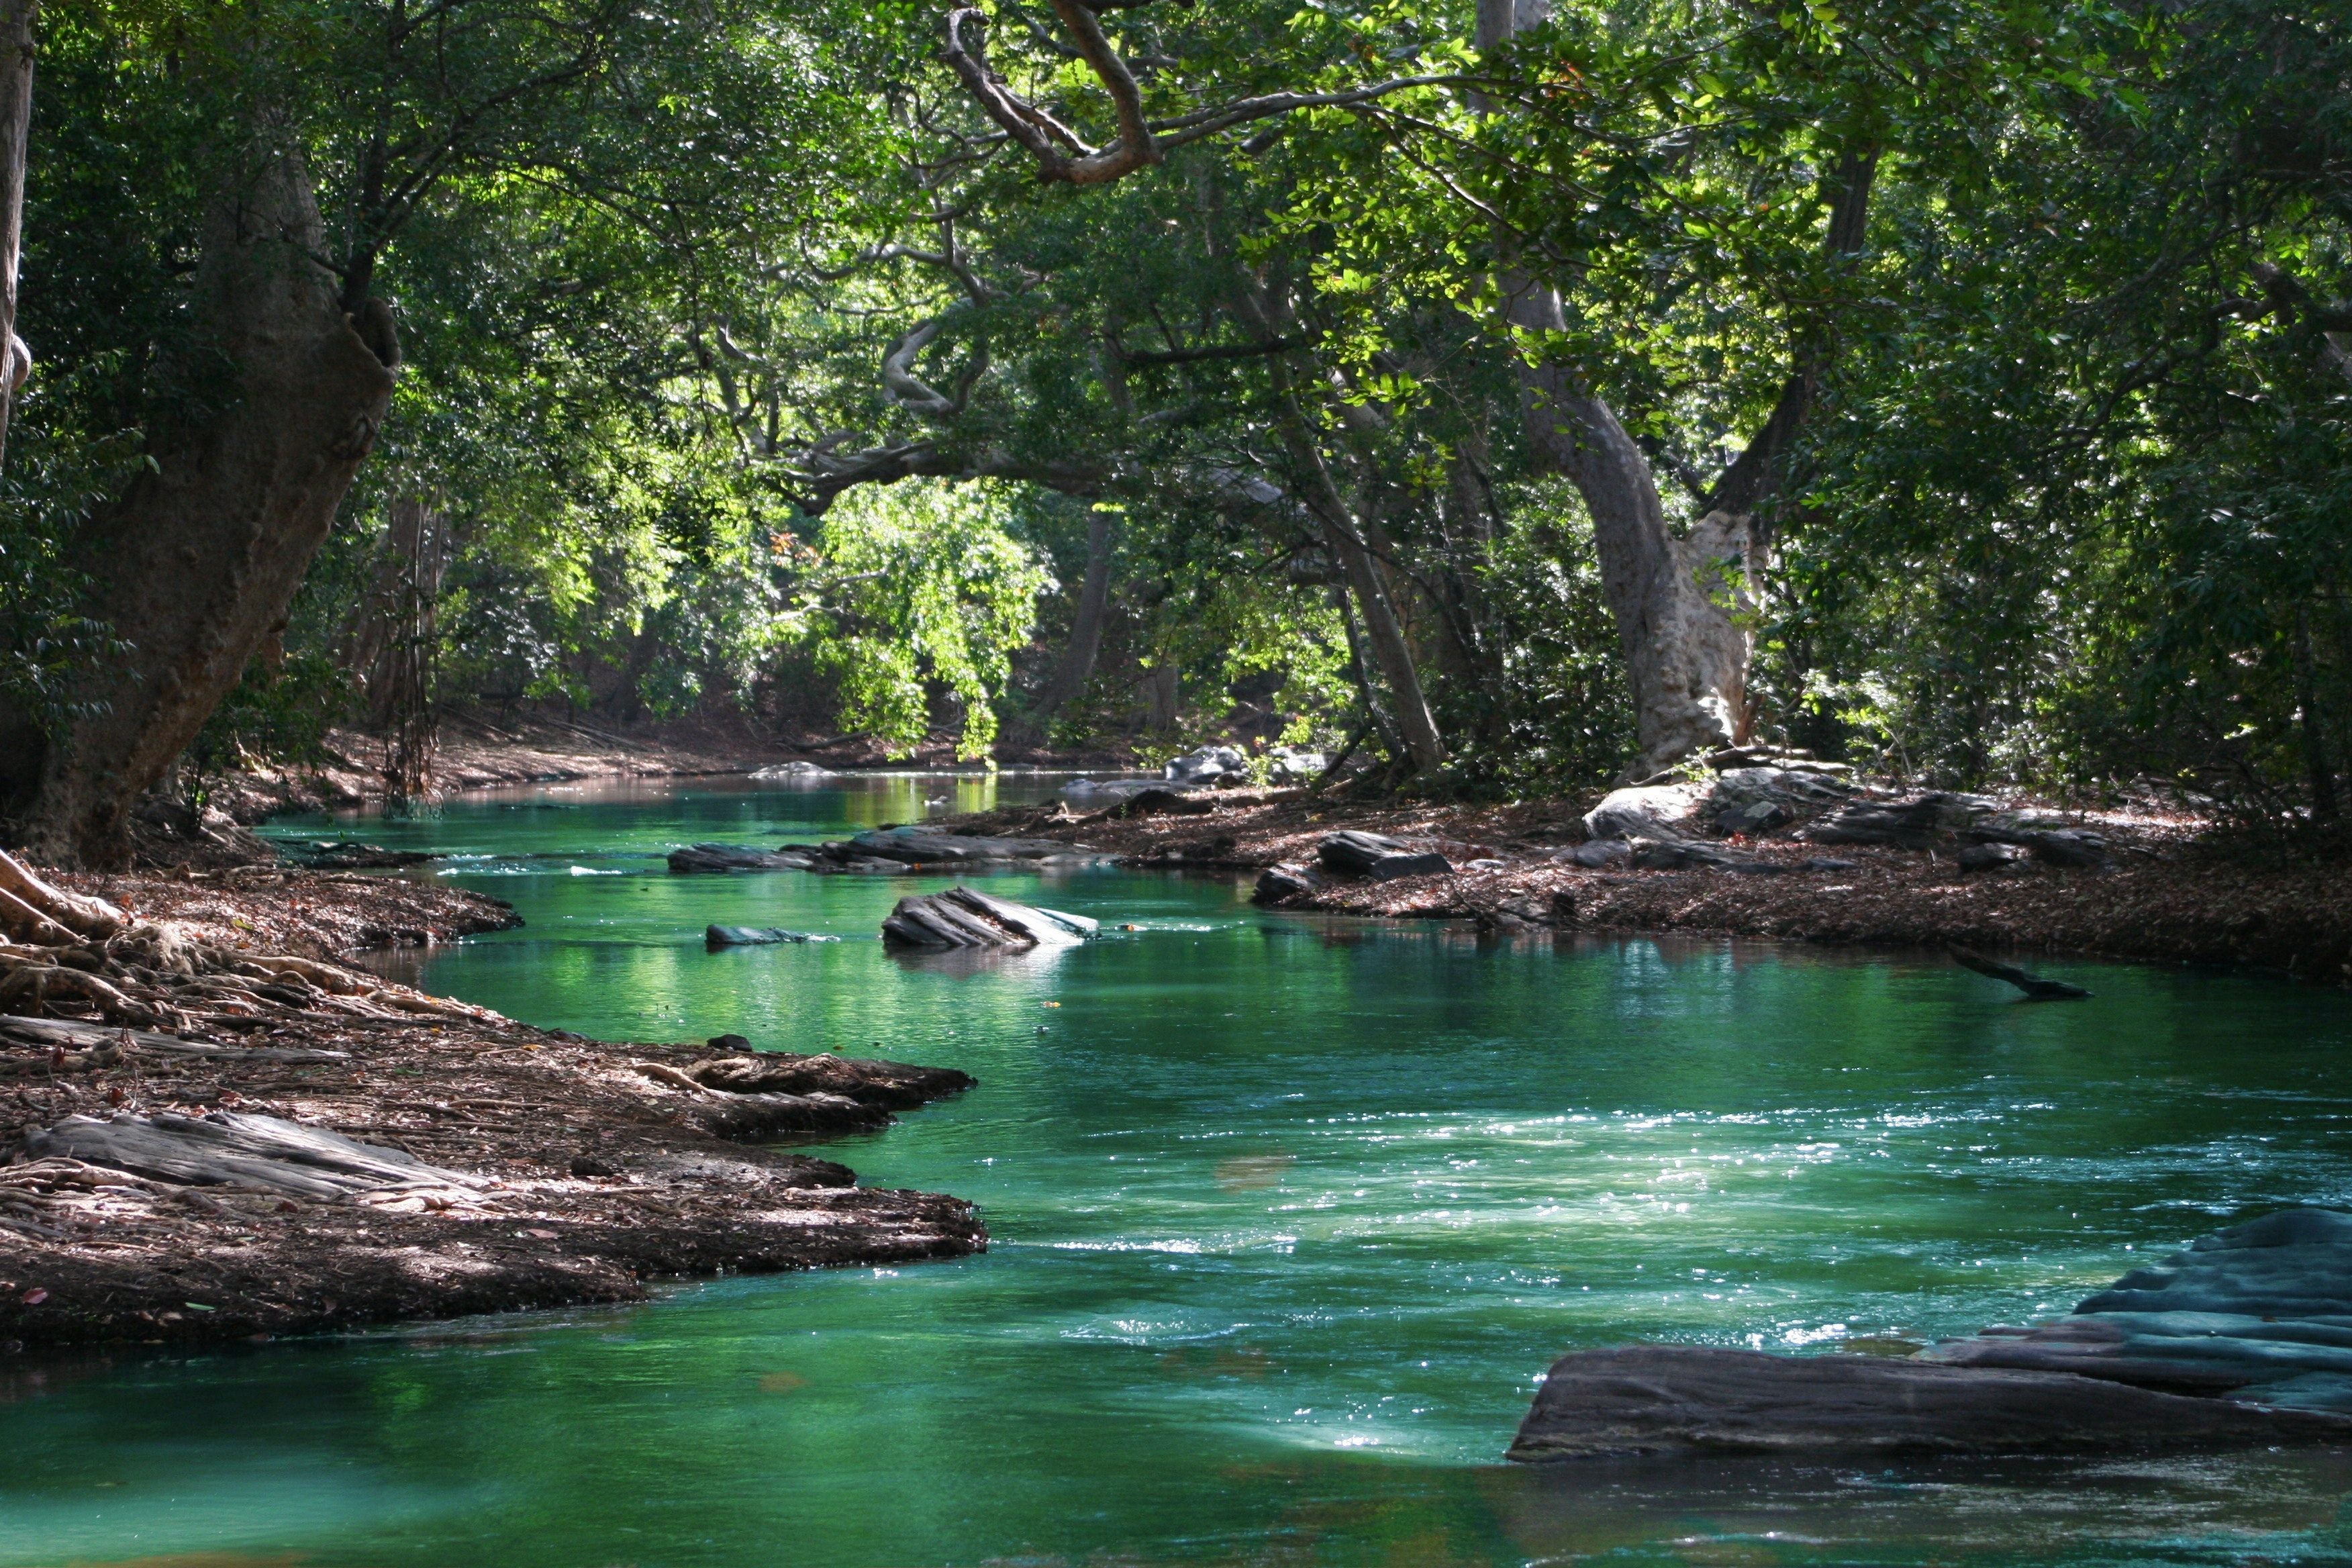 Body of Water Between Green Leaf Trees, Beautiful, River, Water, Vacation, HQ Photo